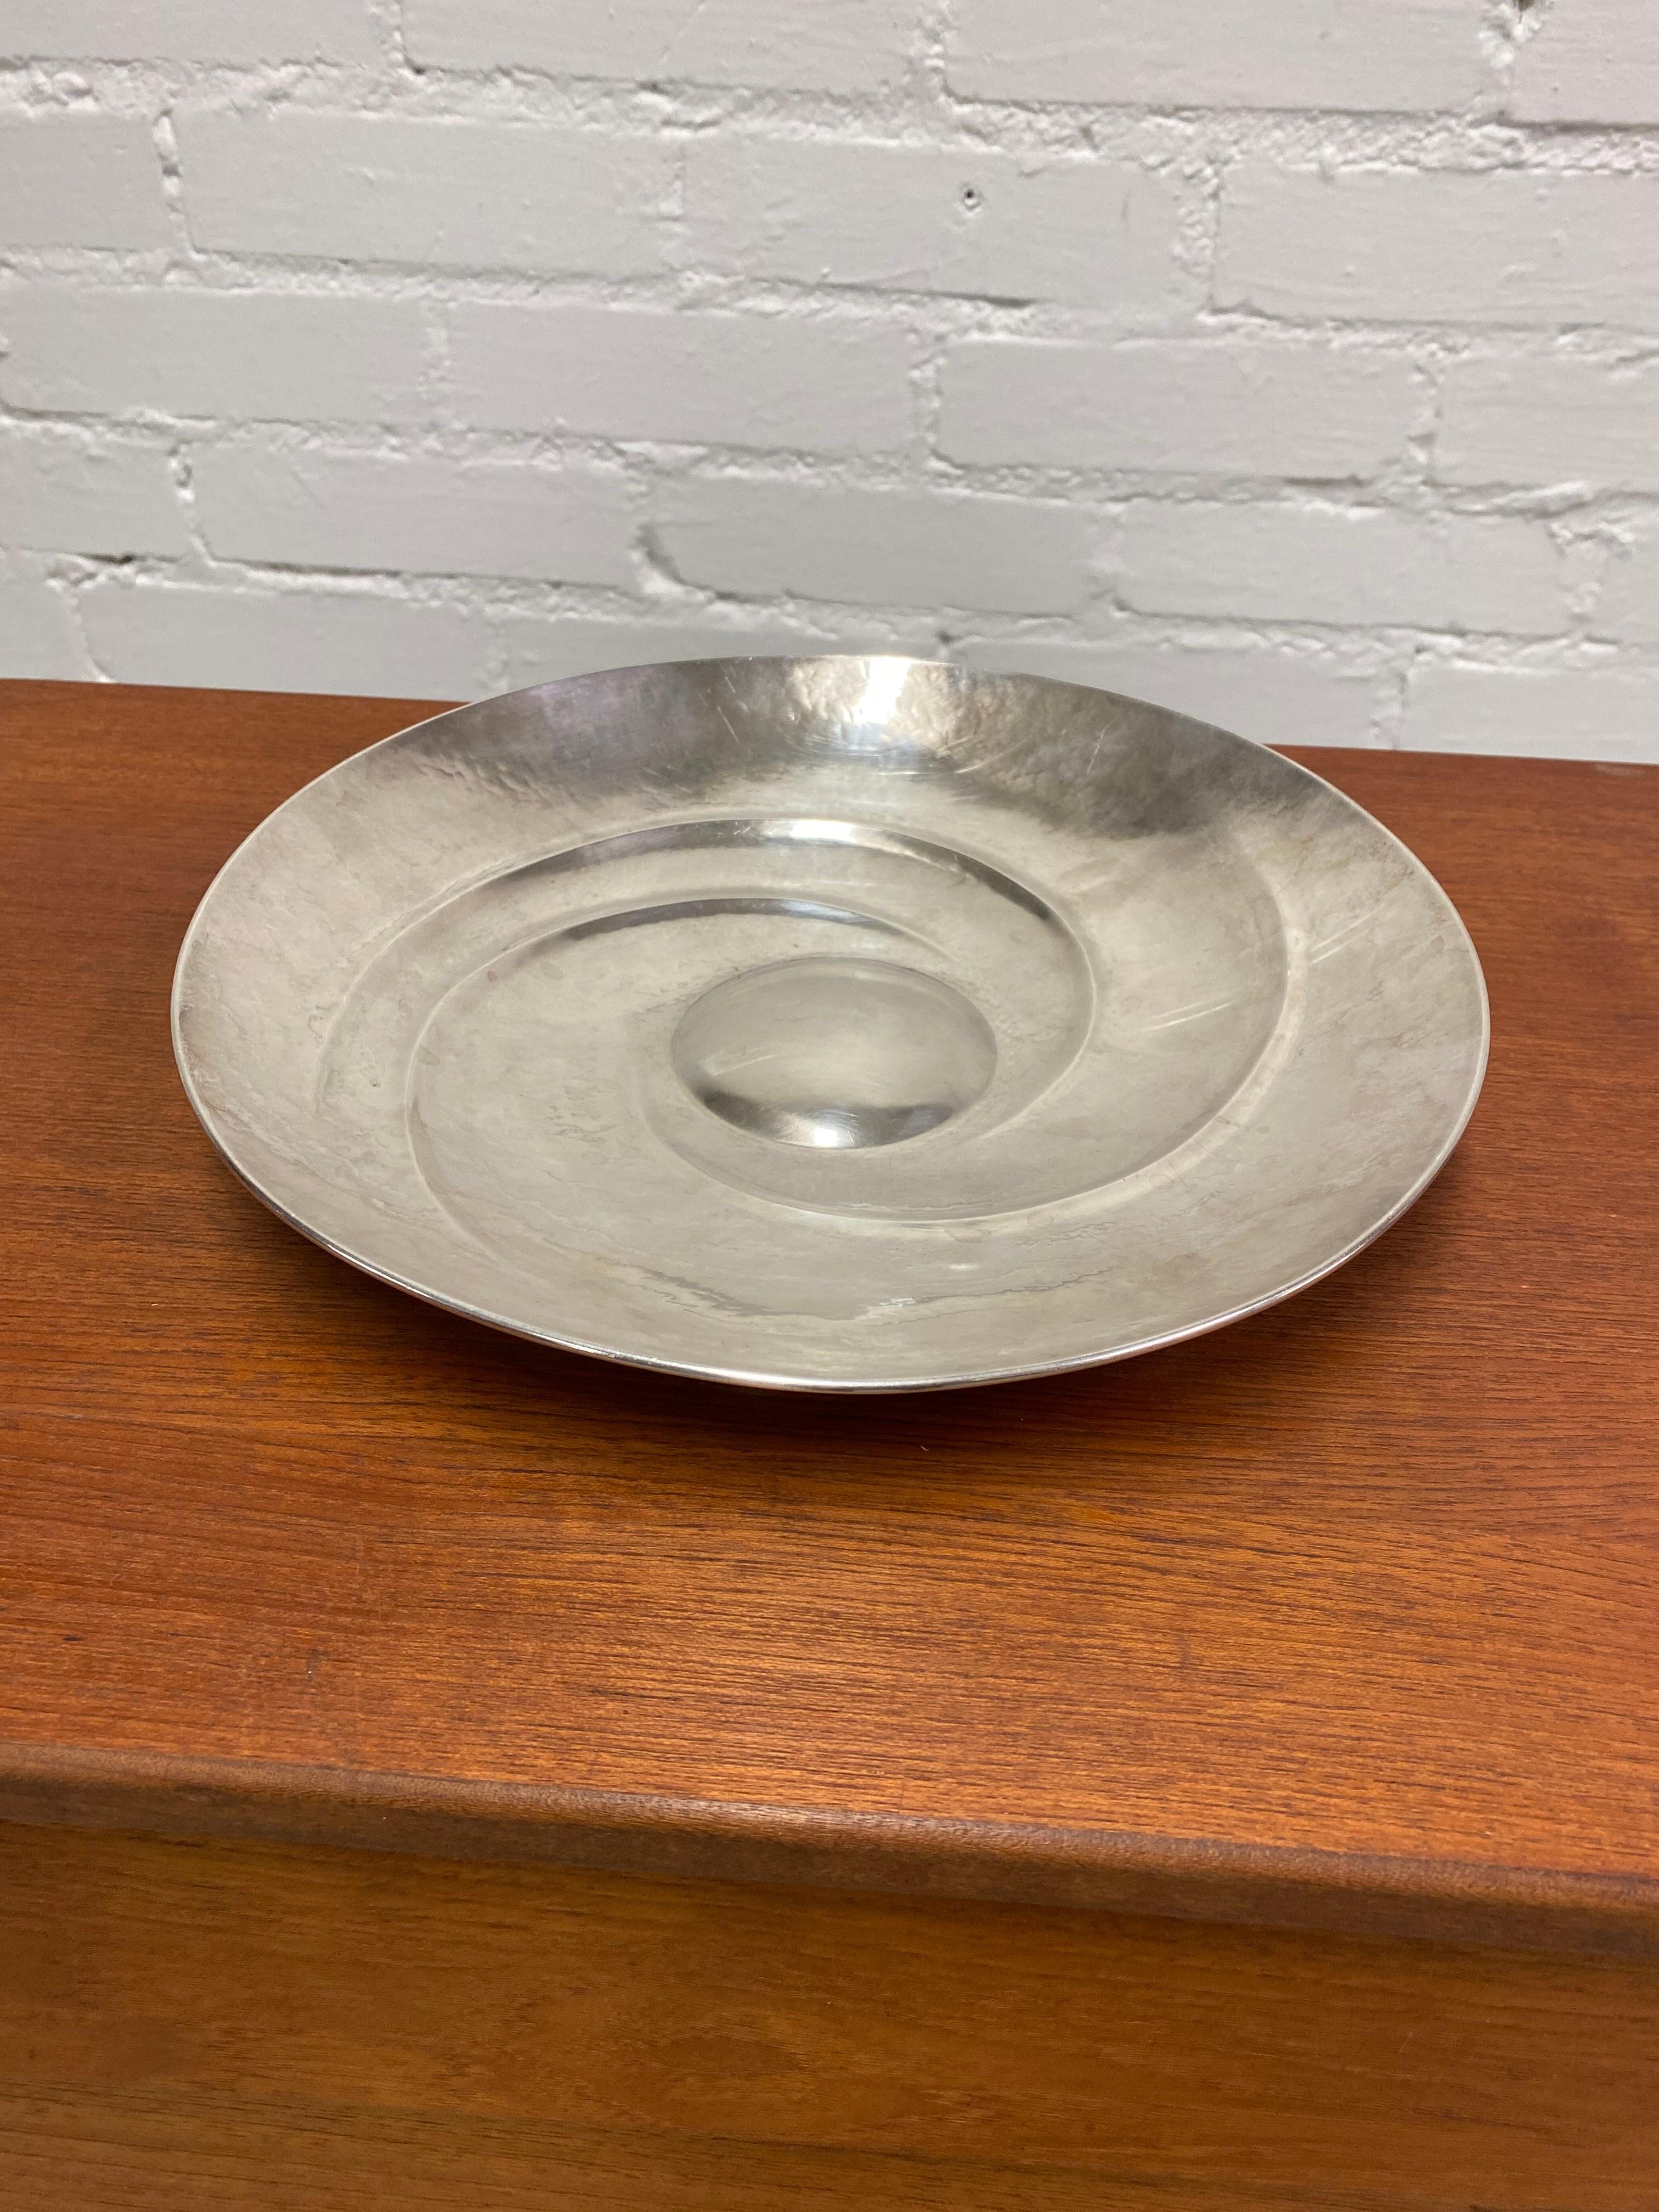 A beautiful decorative dish in silver, designed by Tapio Wirkkala and manufactured by Kultakeskus Oy in the 1970s Finland. This piece is documented in Tapio Wirkkala's book and the model number is 143. A very simple but elegant centerpiece that fits